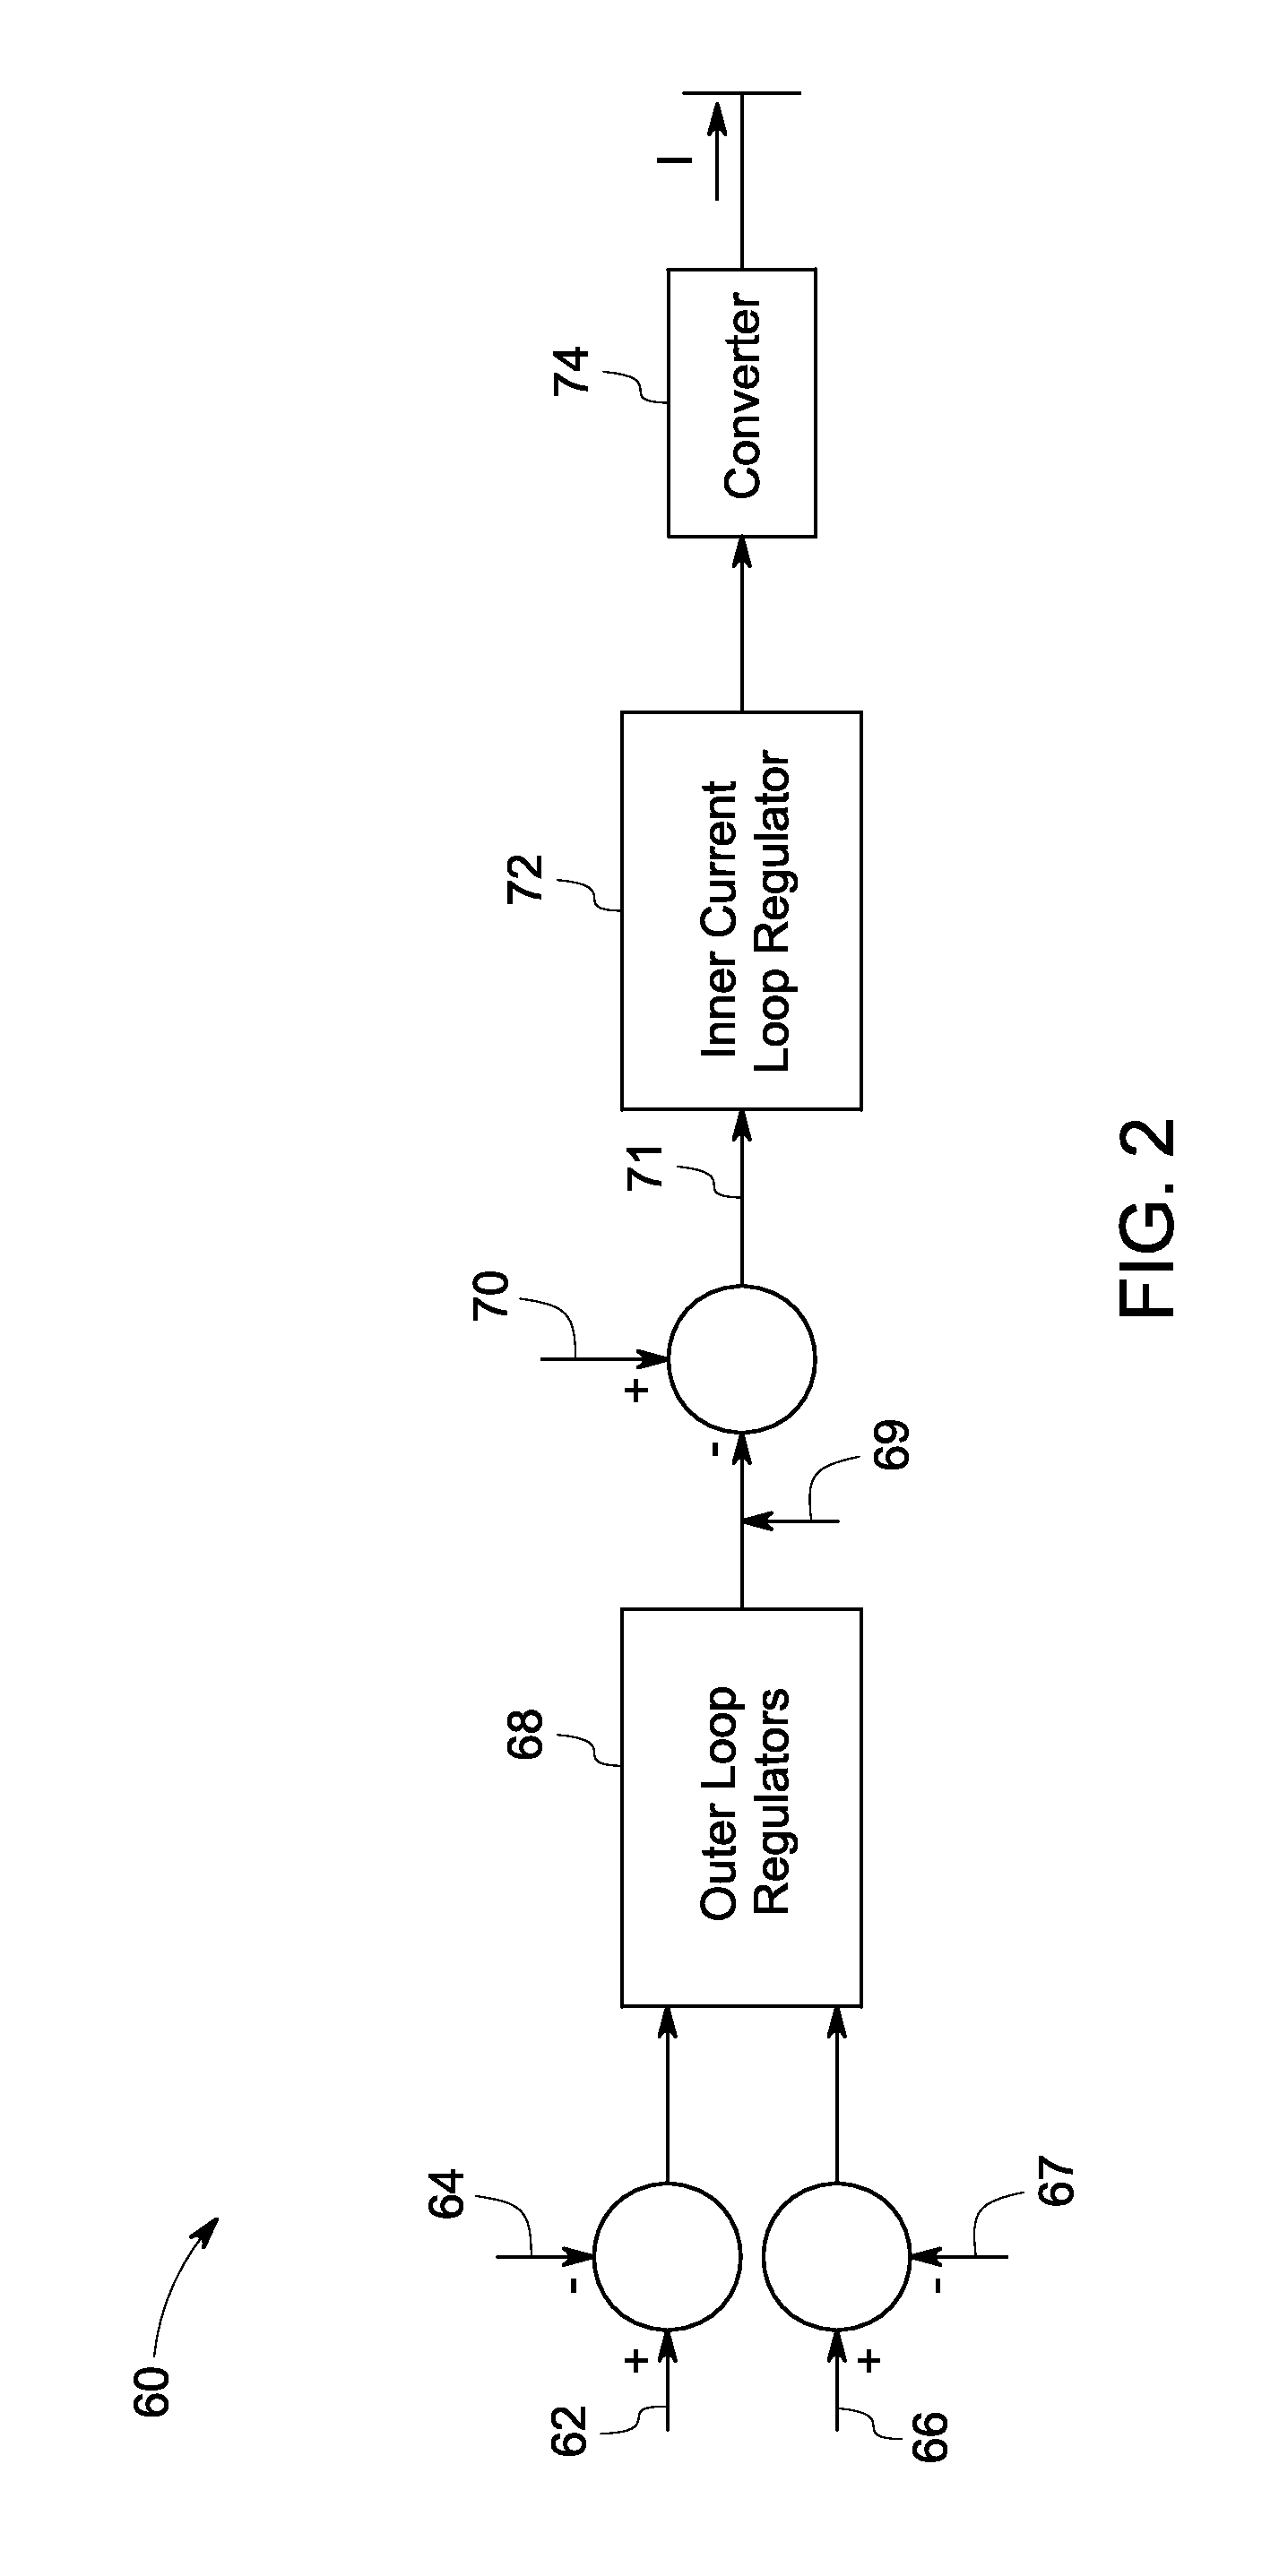 System and method for control of a grid connected power generating system